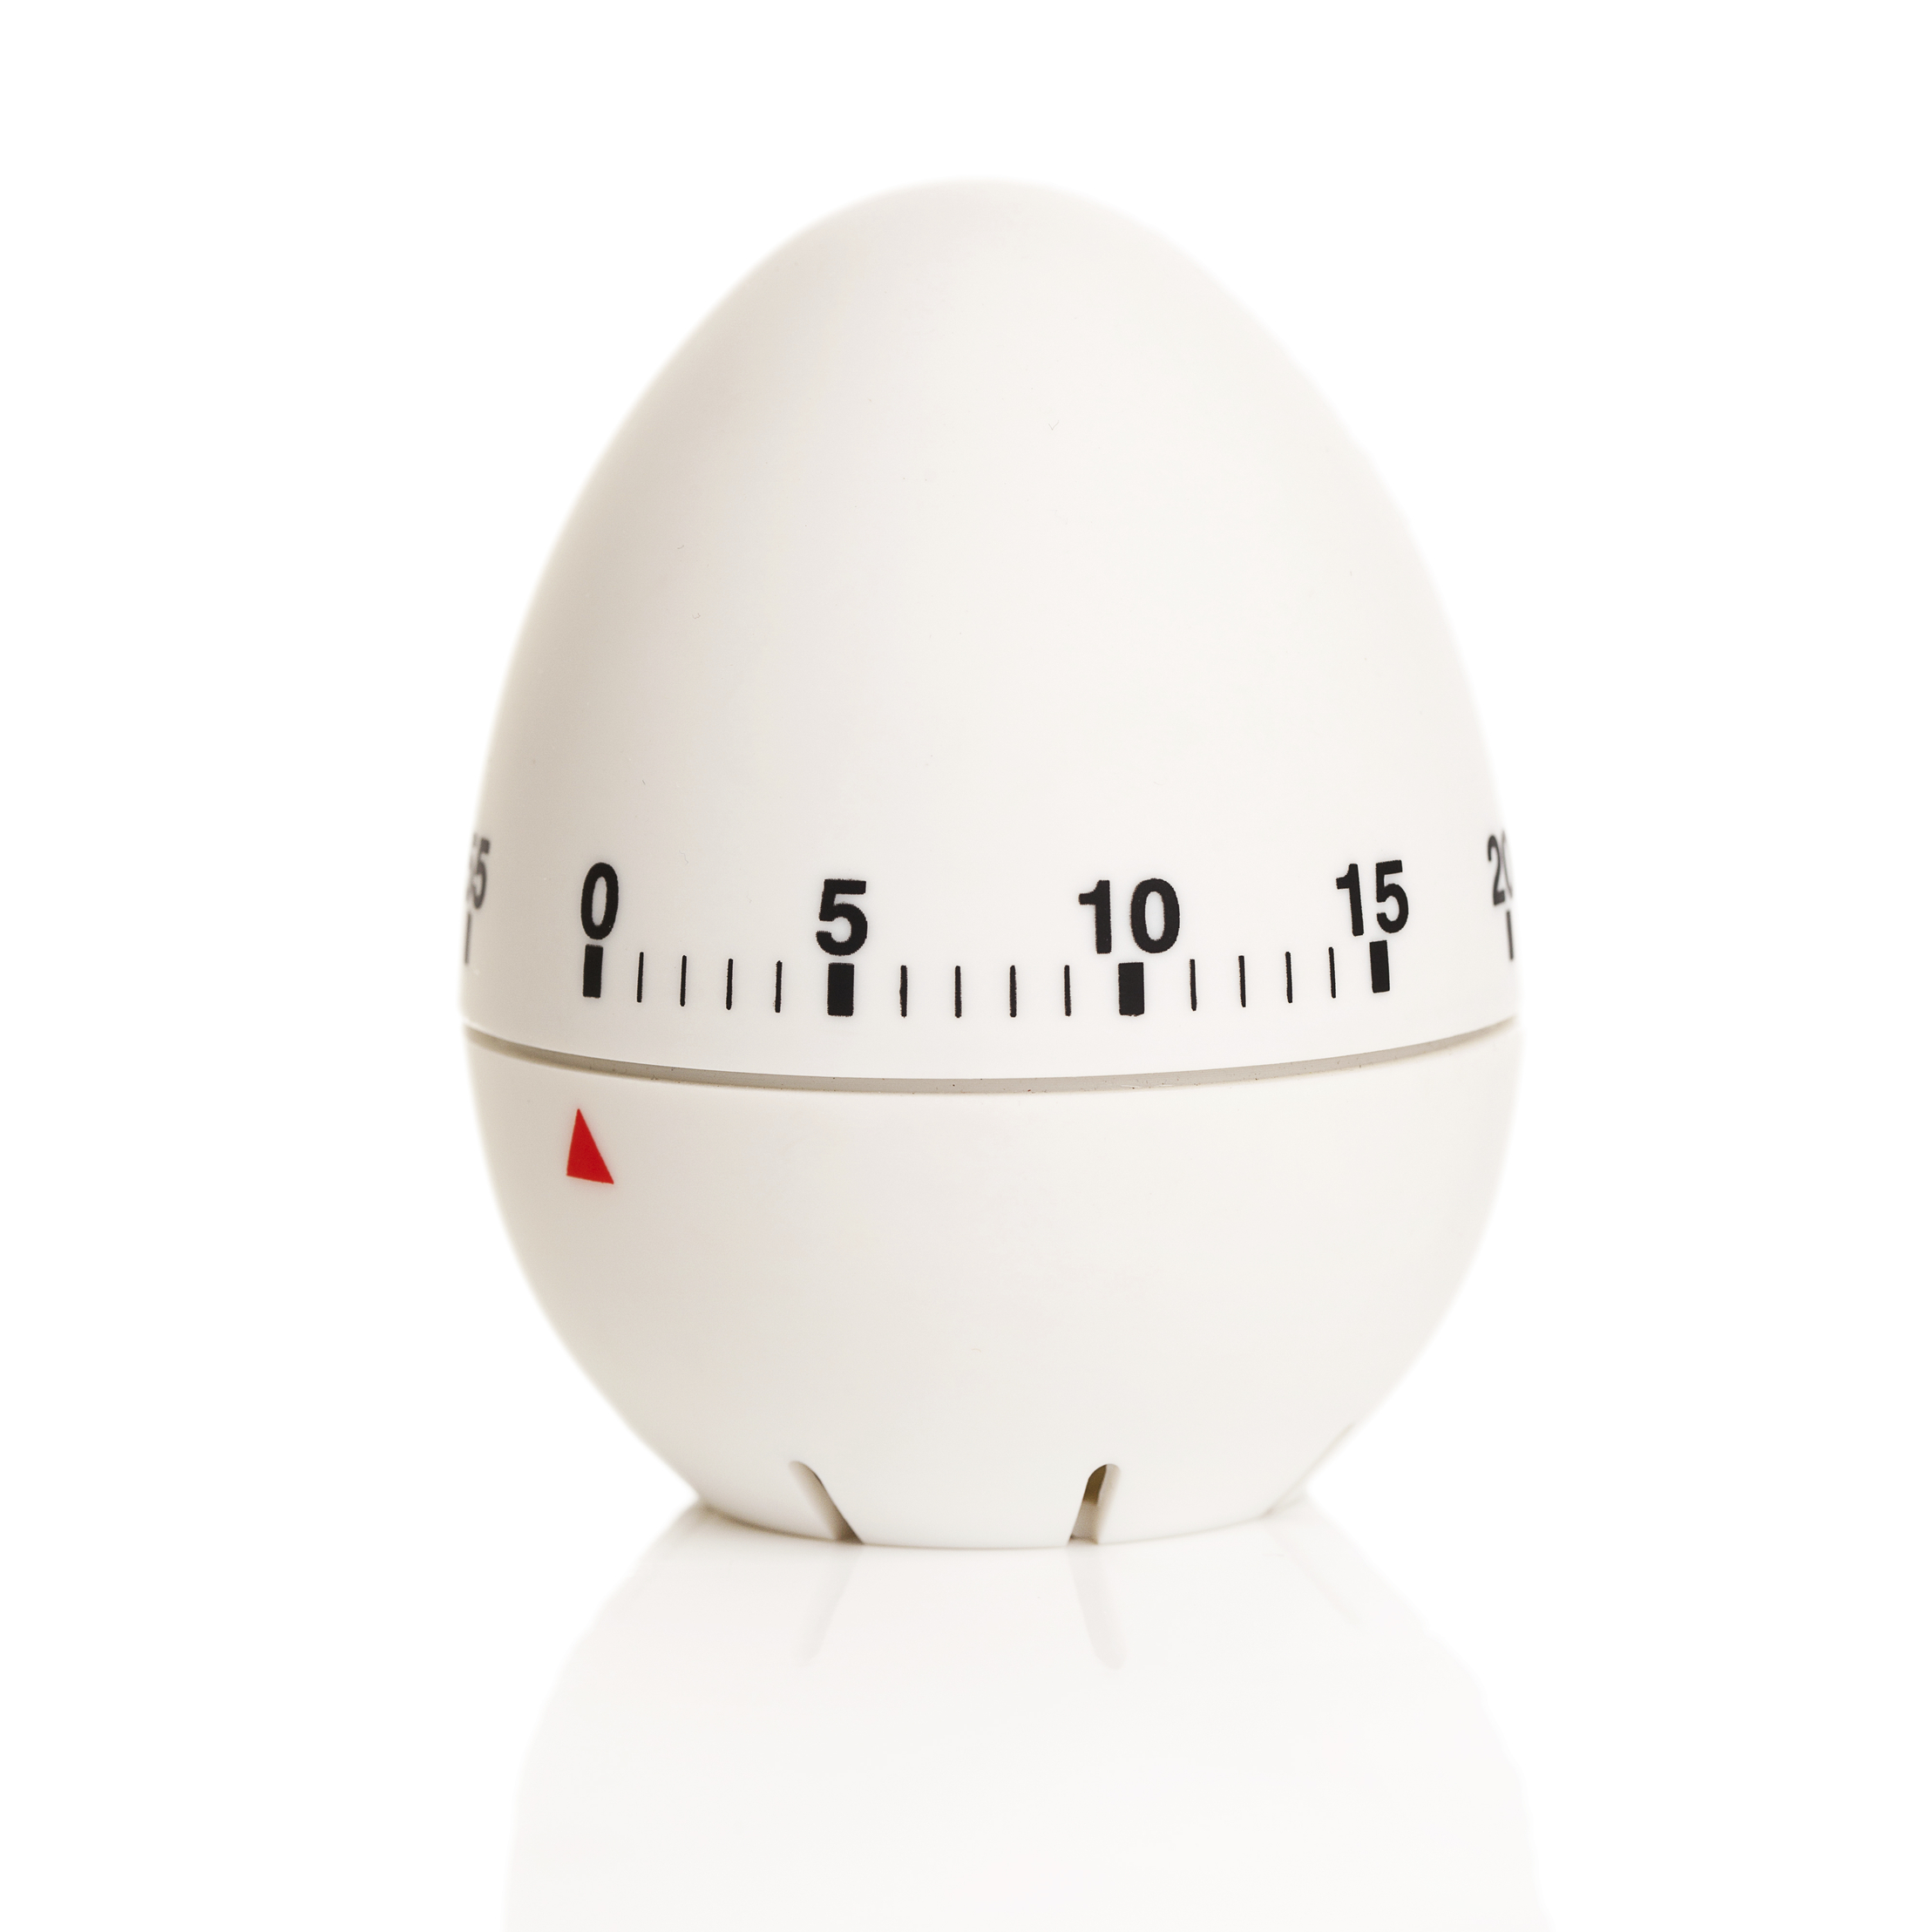 Is Your Egg Timer Buzzing?